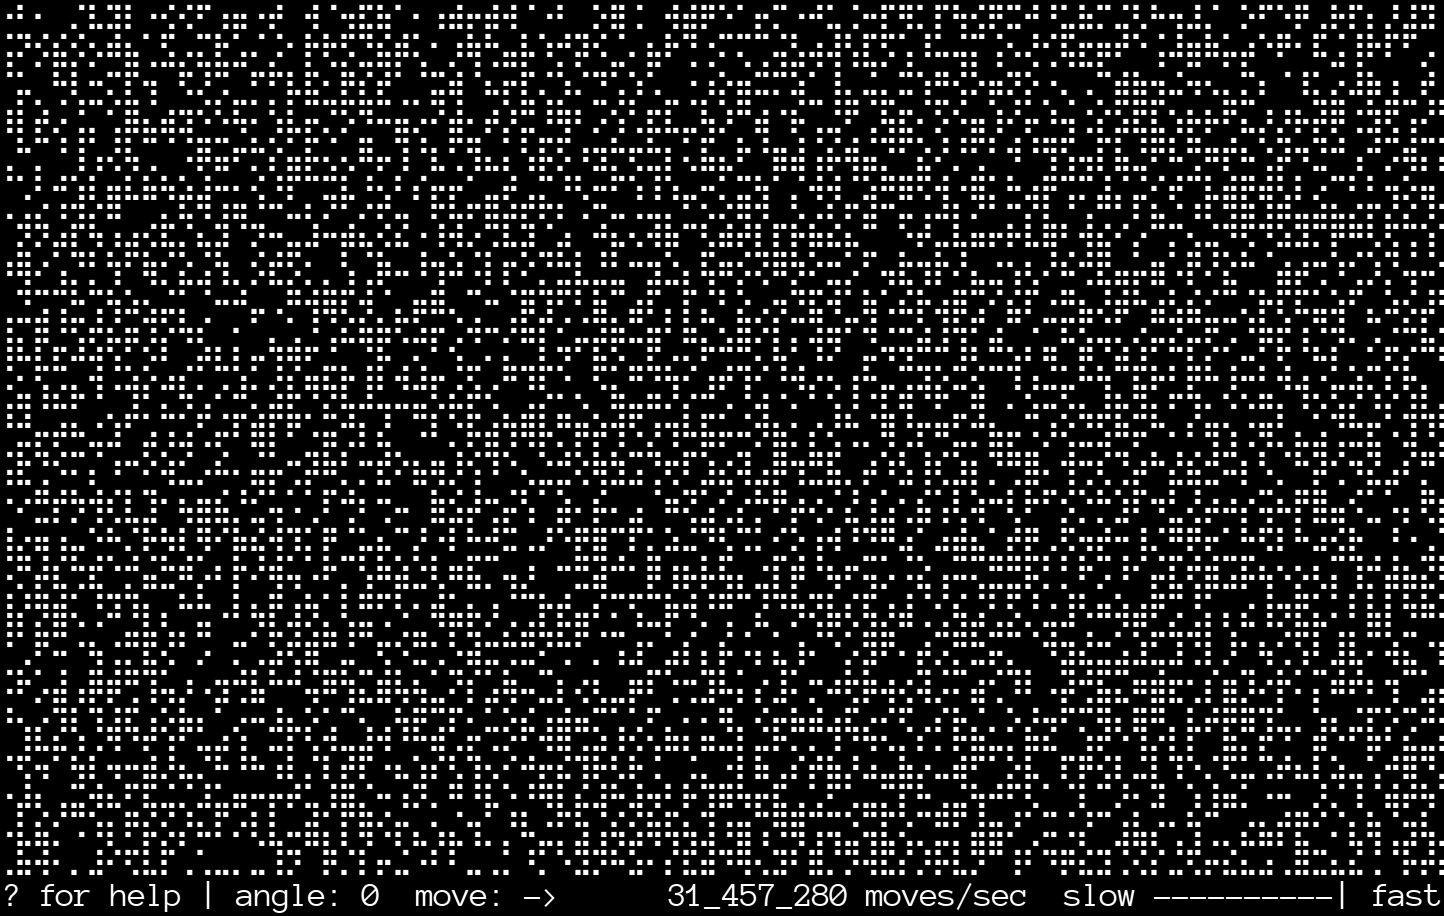 A screenshot of langtons-termite running in a Linux terminal. The background is black and the text is white. Most of the screen is filled with Braille symbols that appear to display only noise. There is a status line of text at the bottom where “31,457,280 moves/sec” is displayed. A slider from “slow” to “fast” is rendered with characters, with a marker located at the fast end.